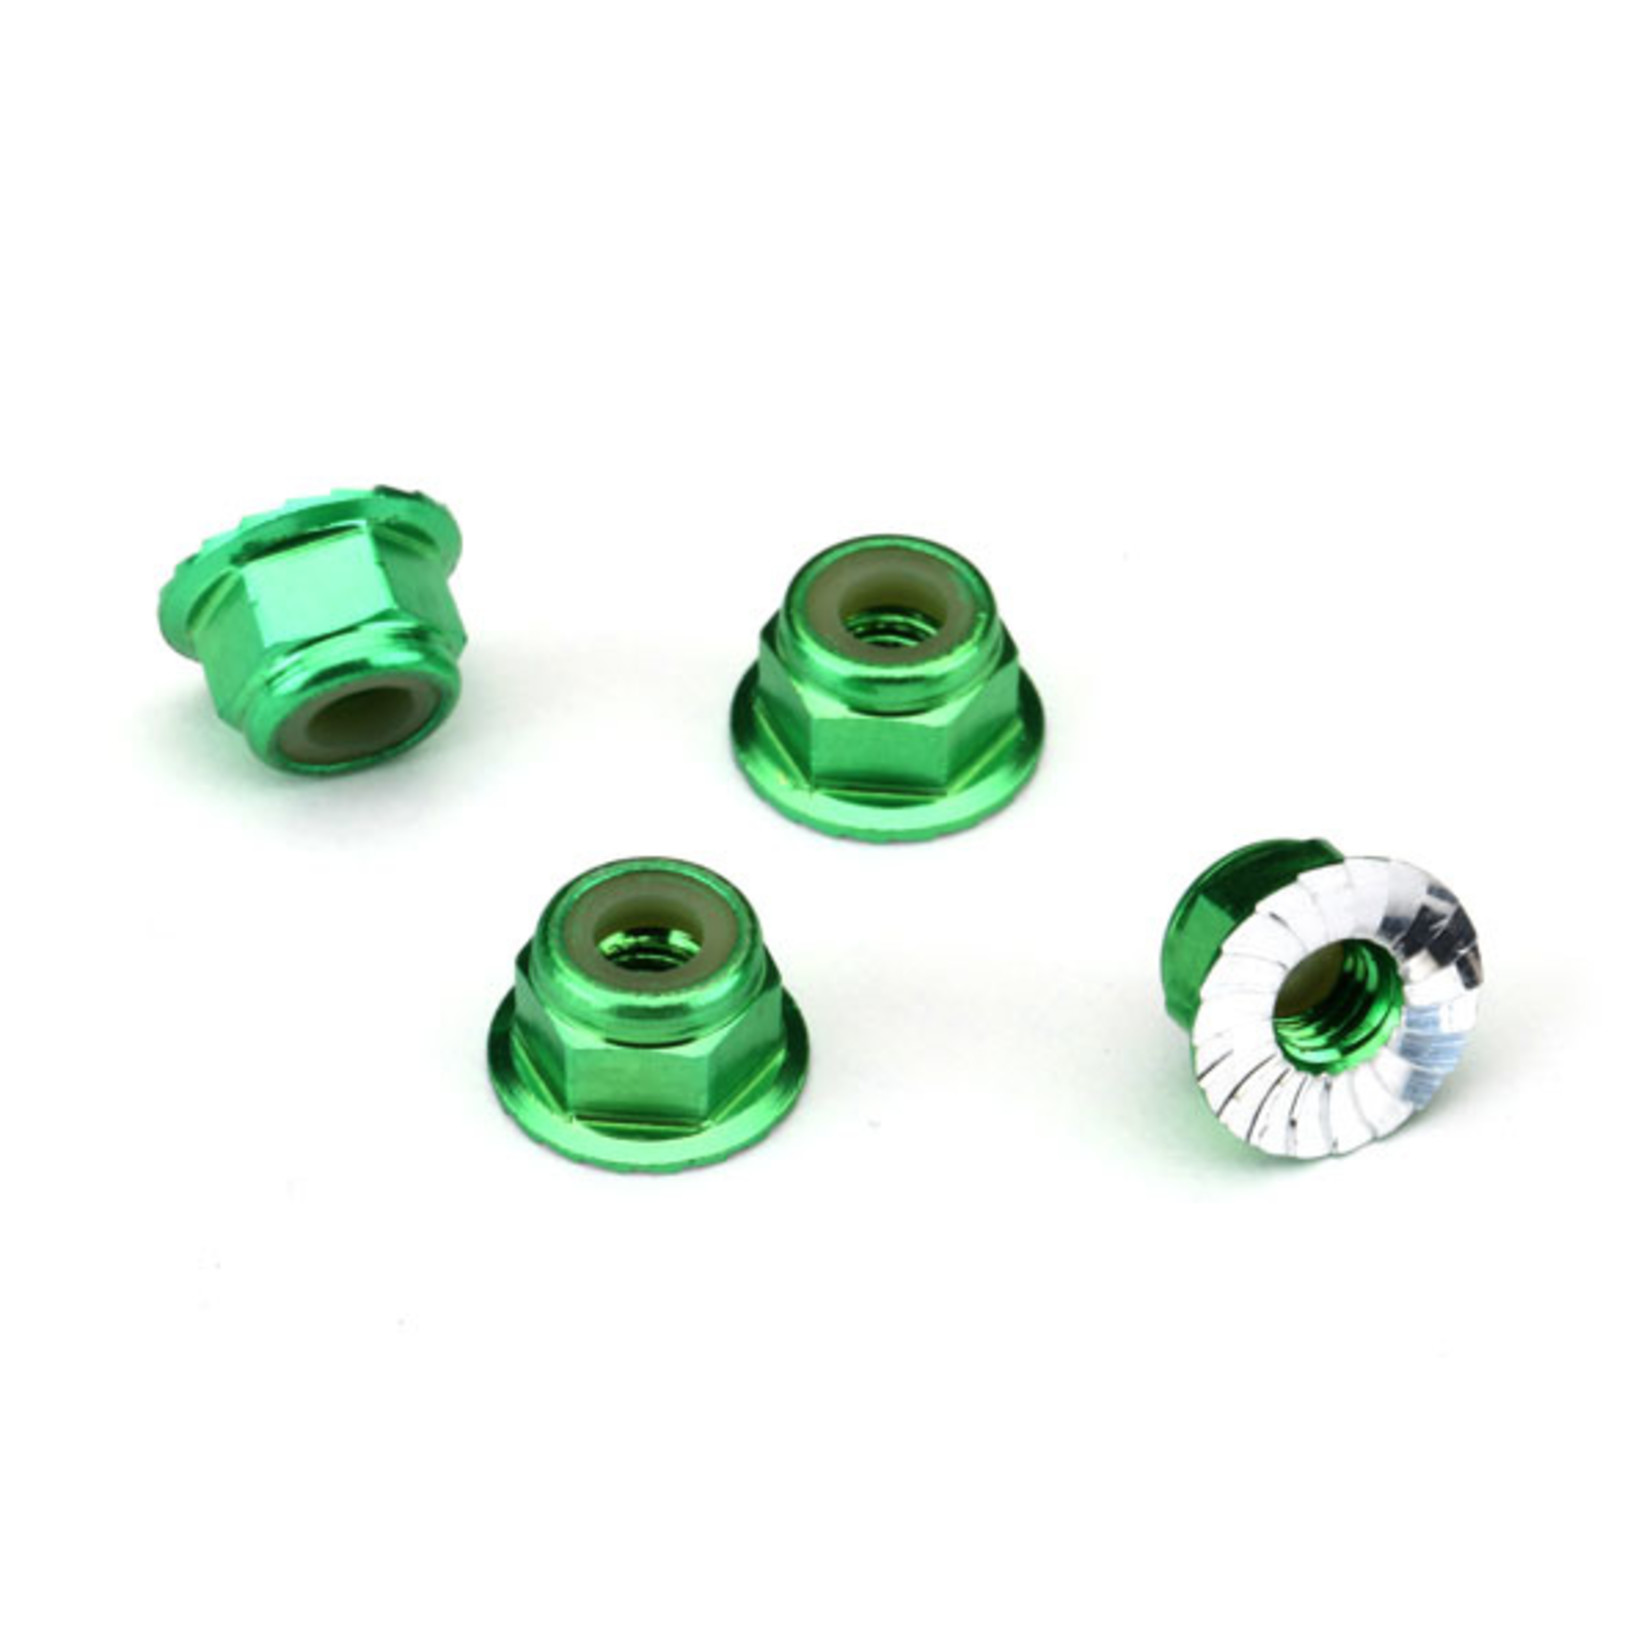 Traxxas Traxxas 4mm Aluminum Flanged Serrated Nuts (Green) (4) #1747G